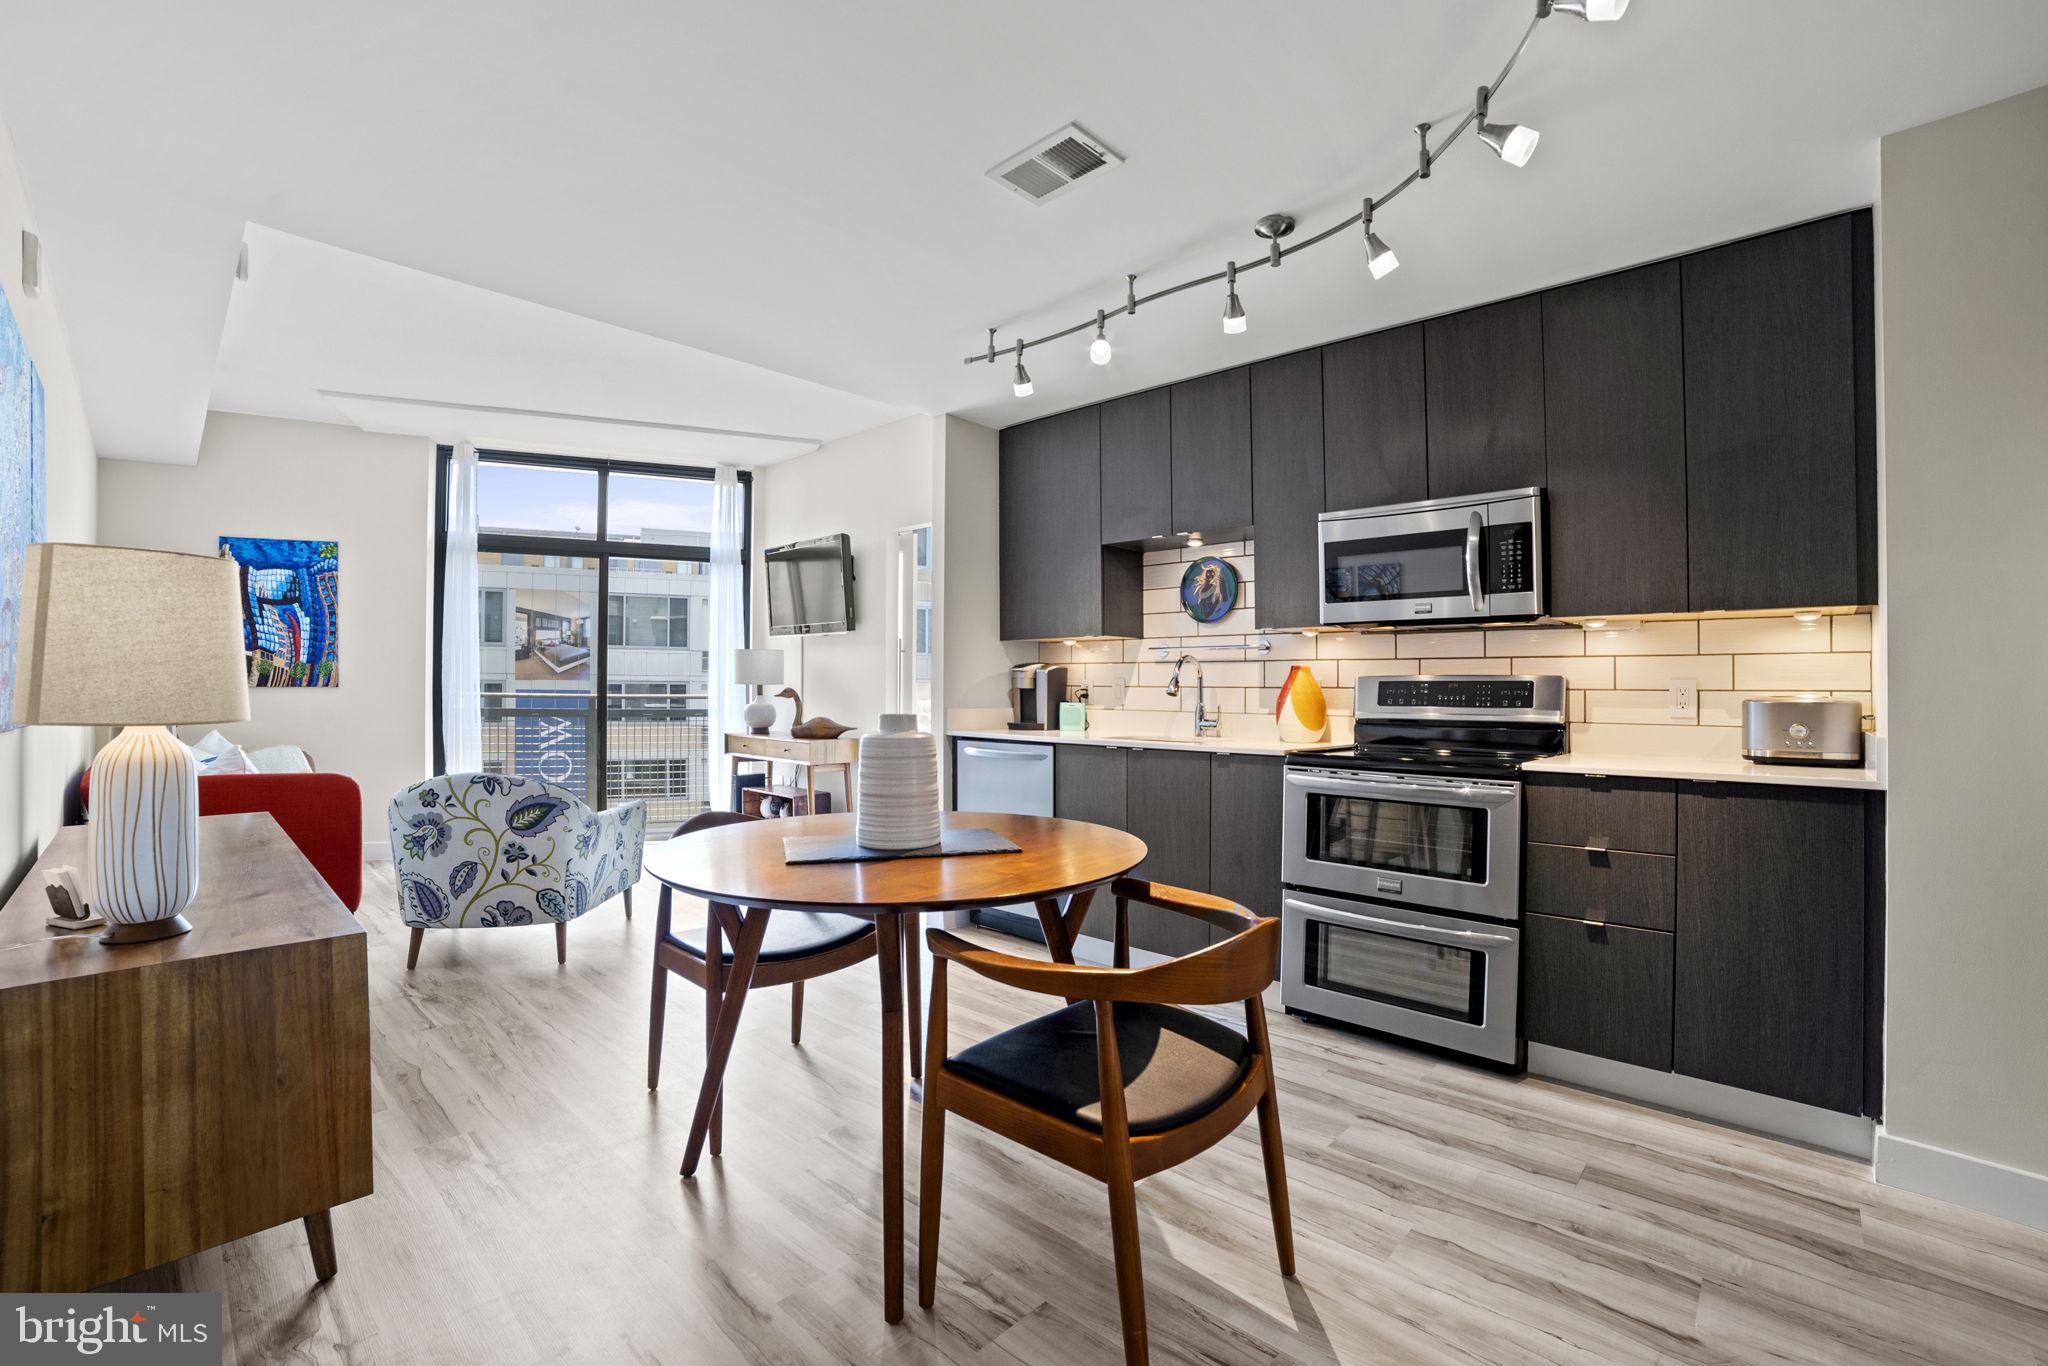 a kitchen with stainless steel appliances kitchen island granite countertop a stove a refrigerator a sink a dining table and chairs with wooden floor